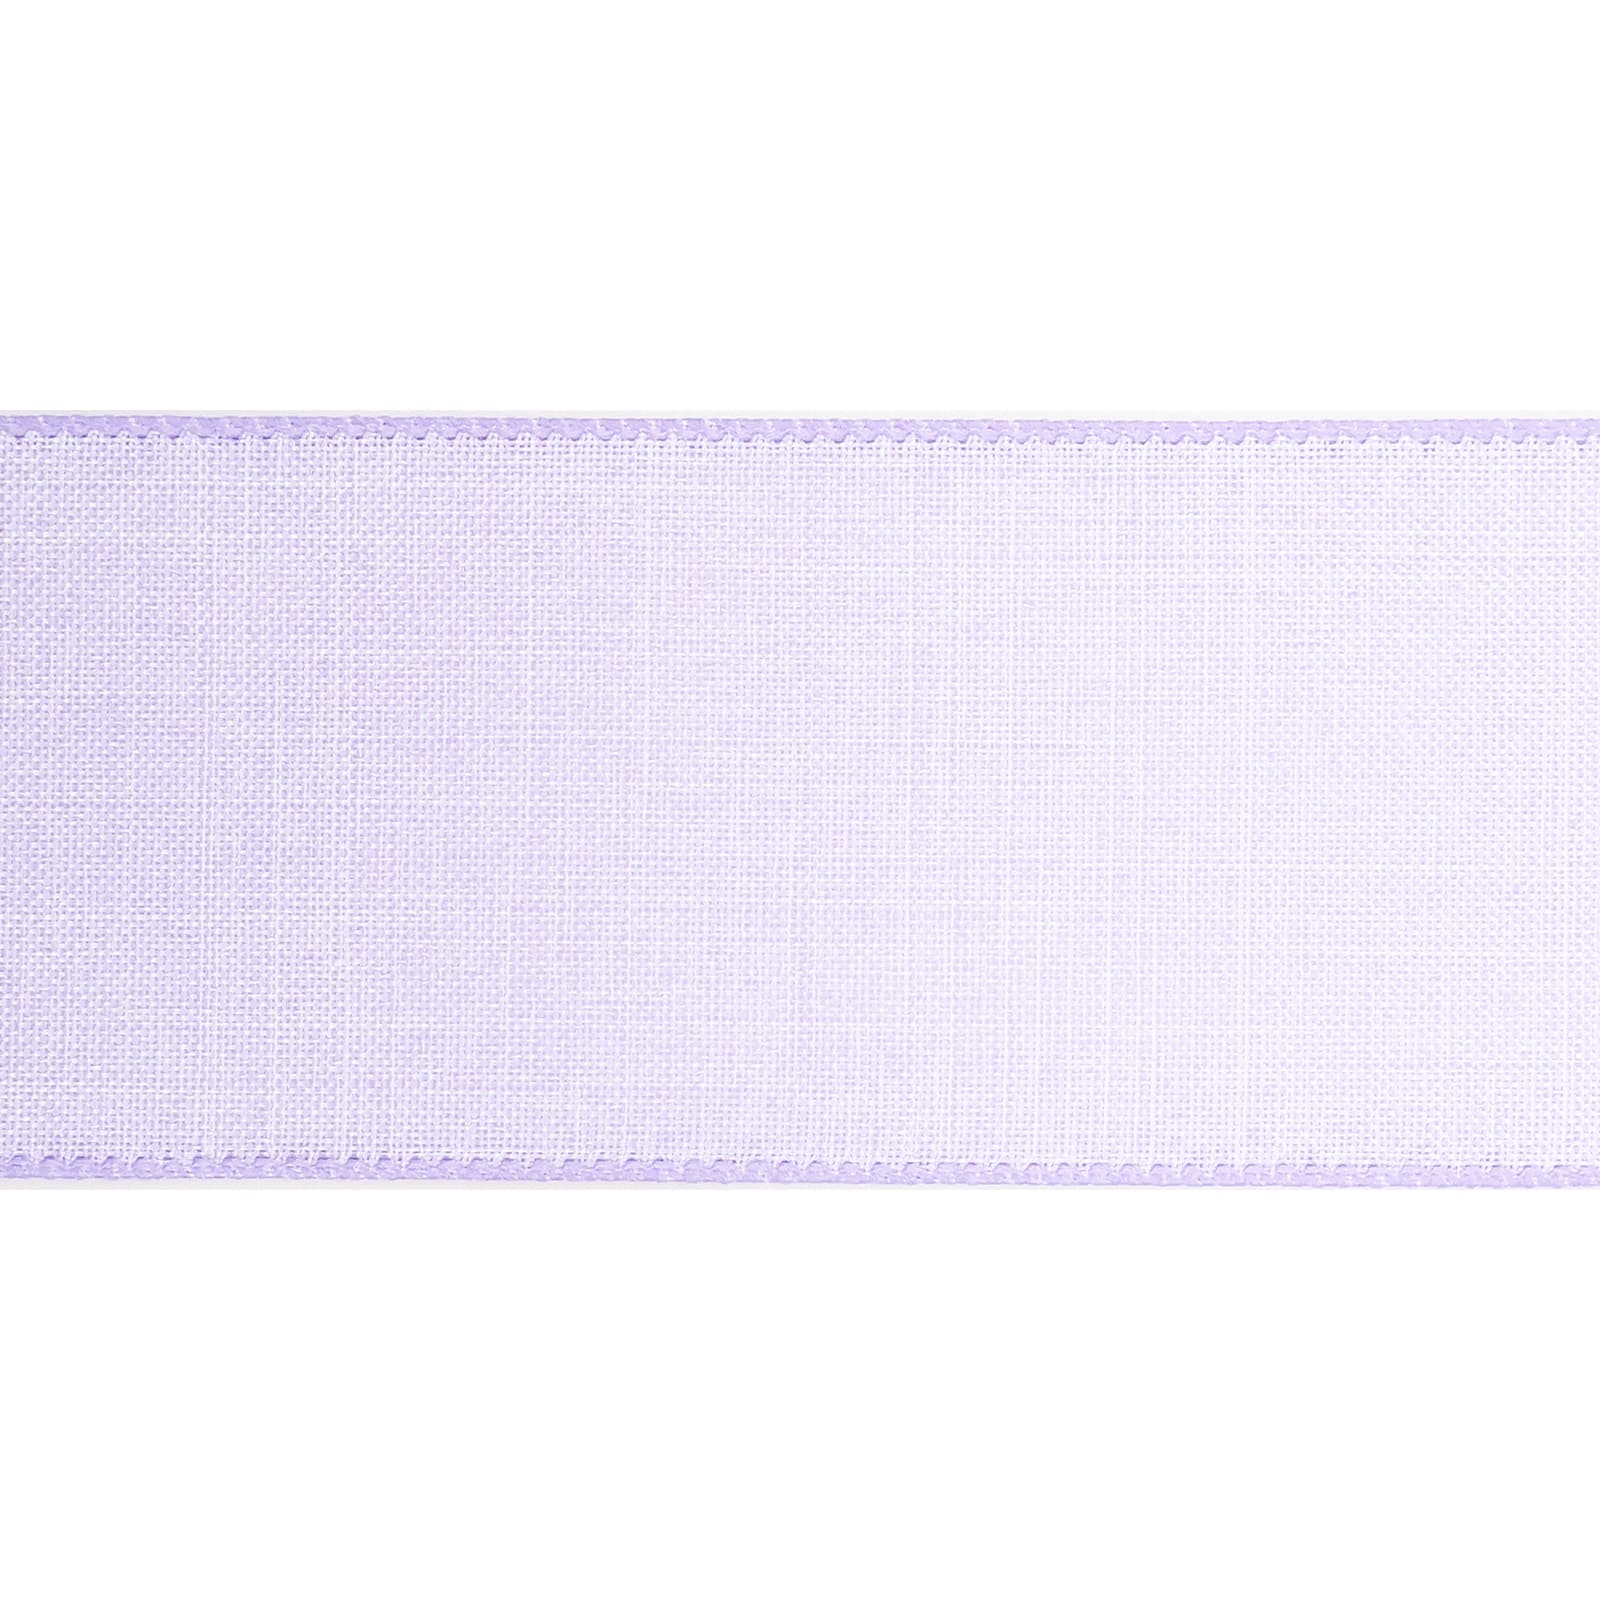 12 Pack: 2.5&#x22; x 25ft. Faux Linen Wired Ribbon by Celebrate It&#x2122; D&#xE9;cor